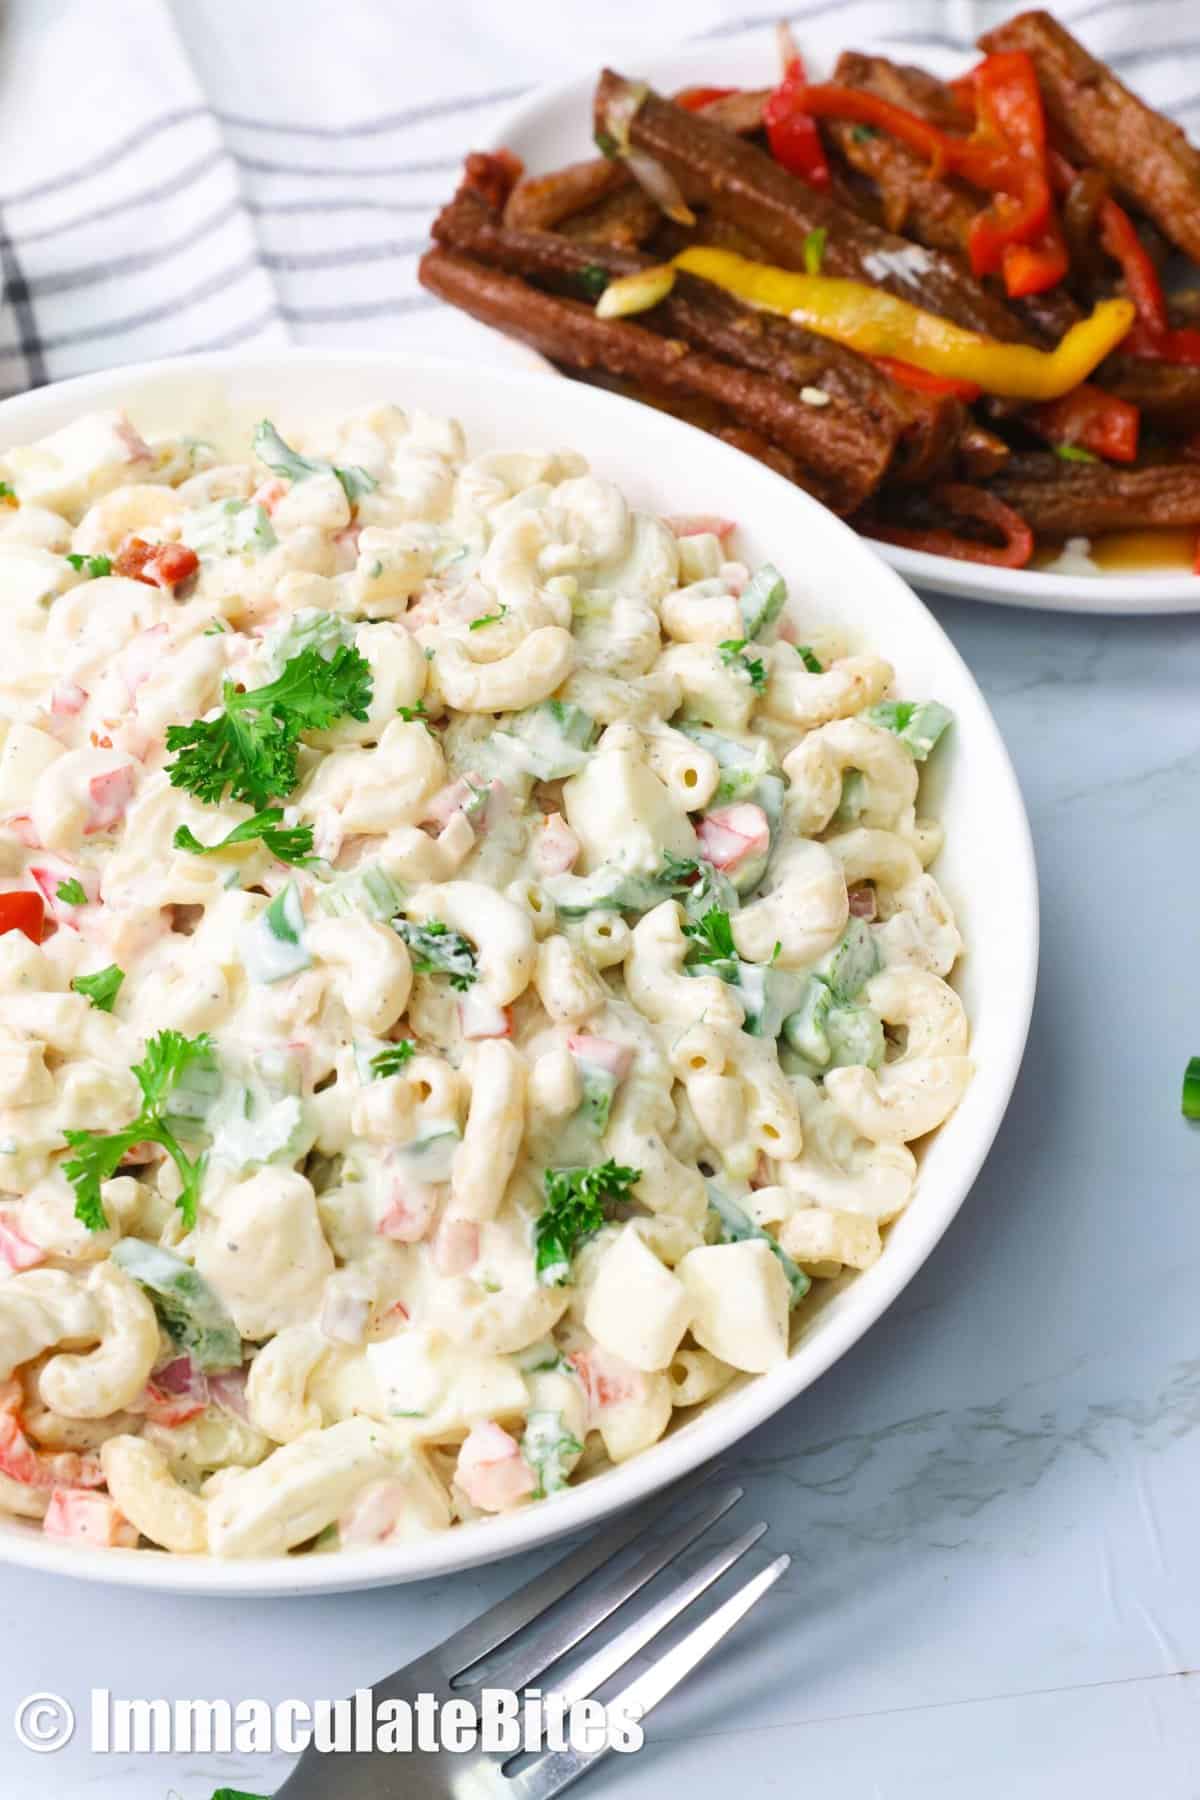 A bowl of macaroni salad with an entree in the background